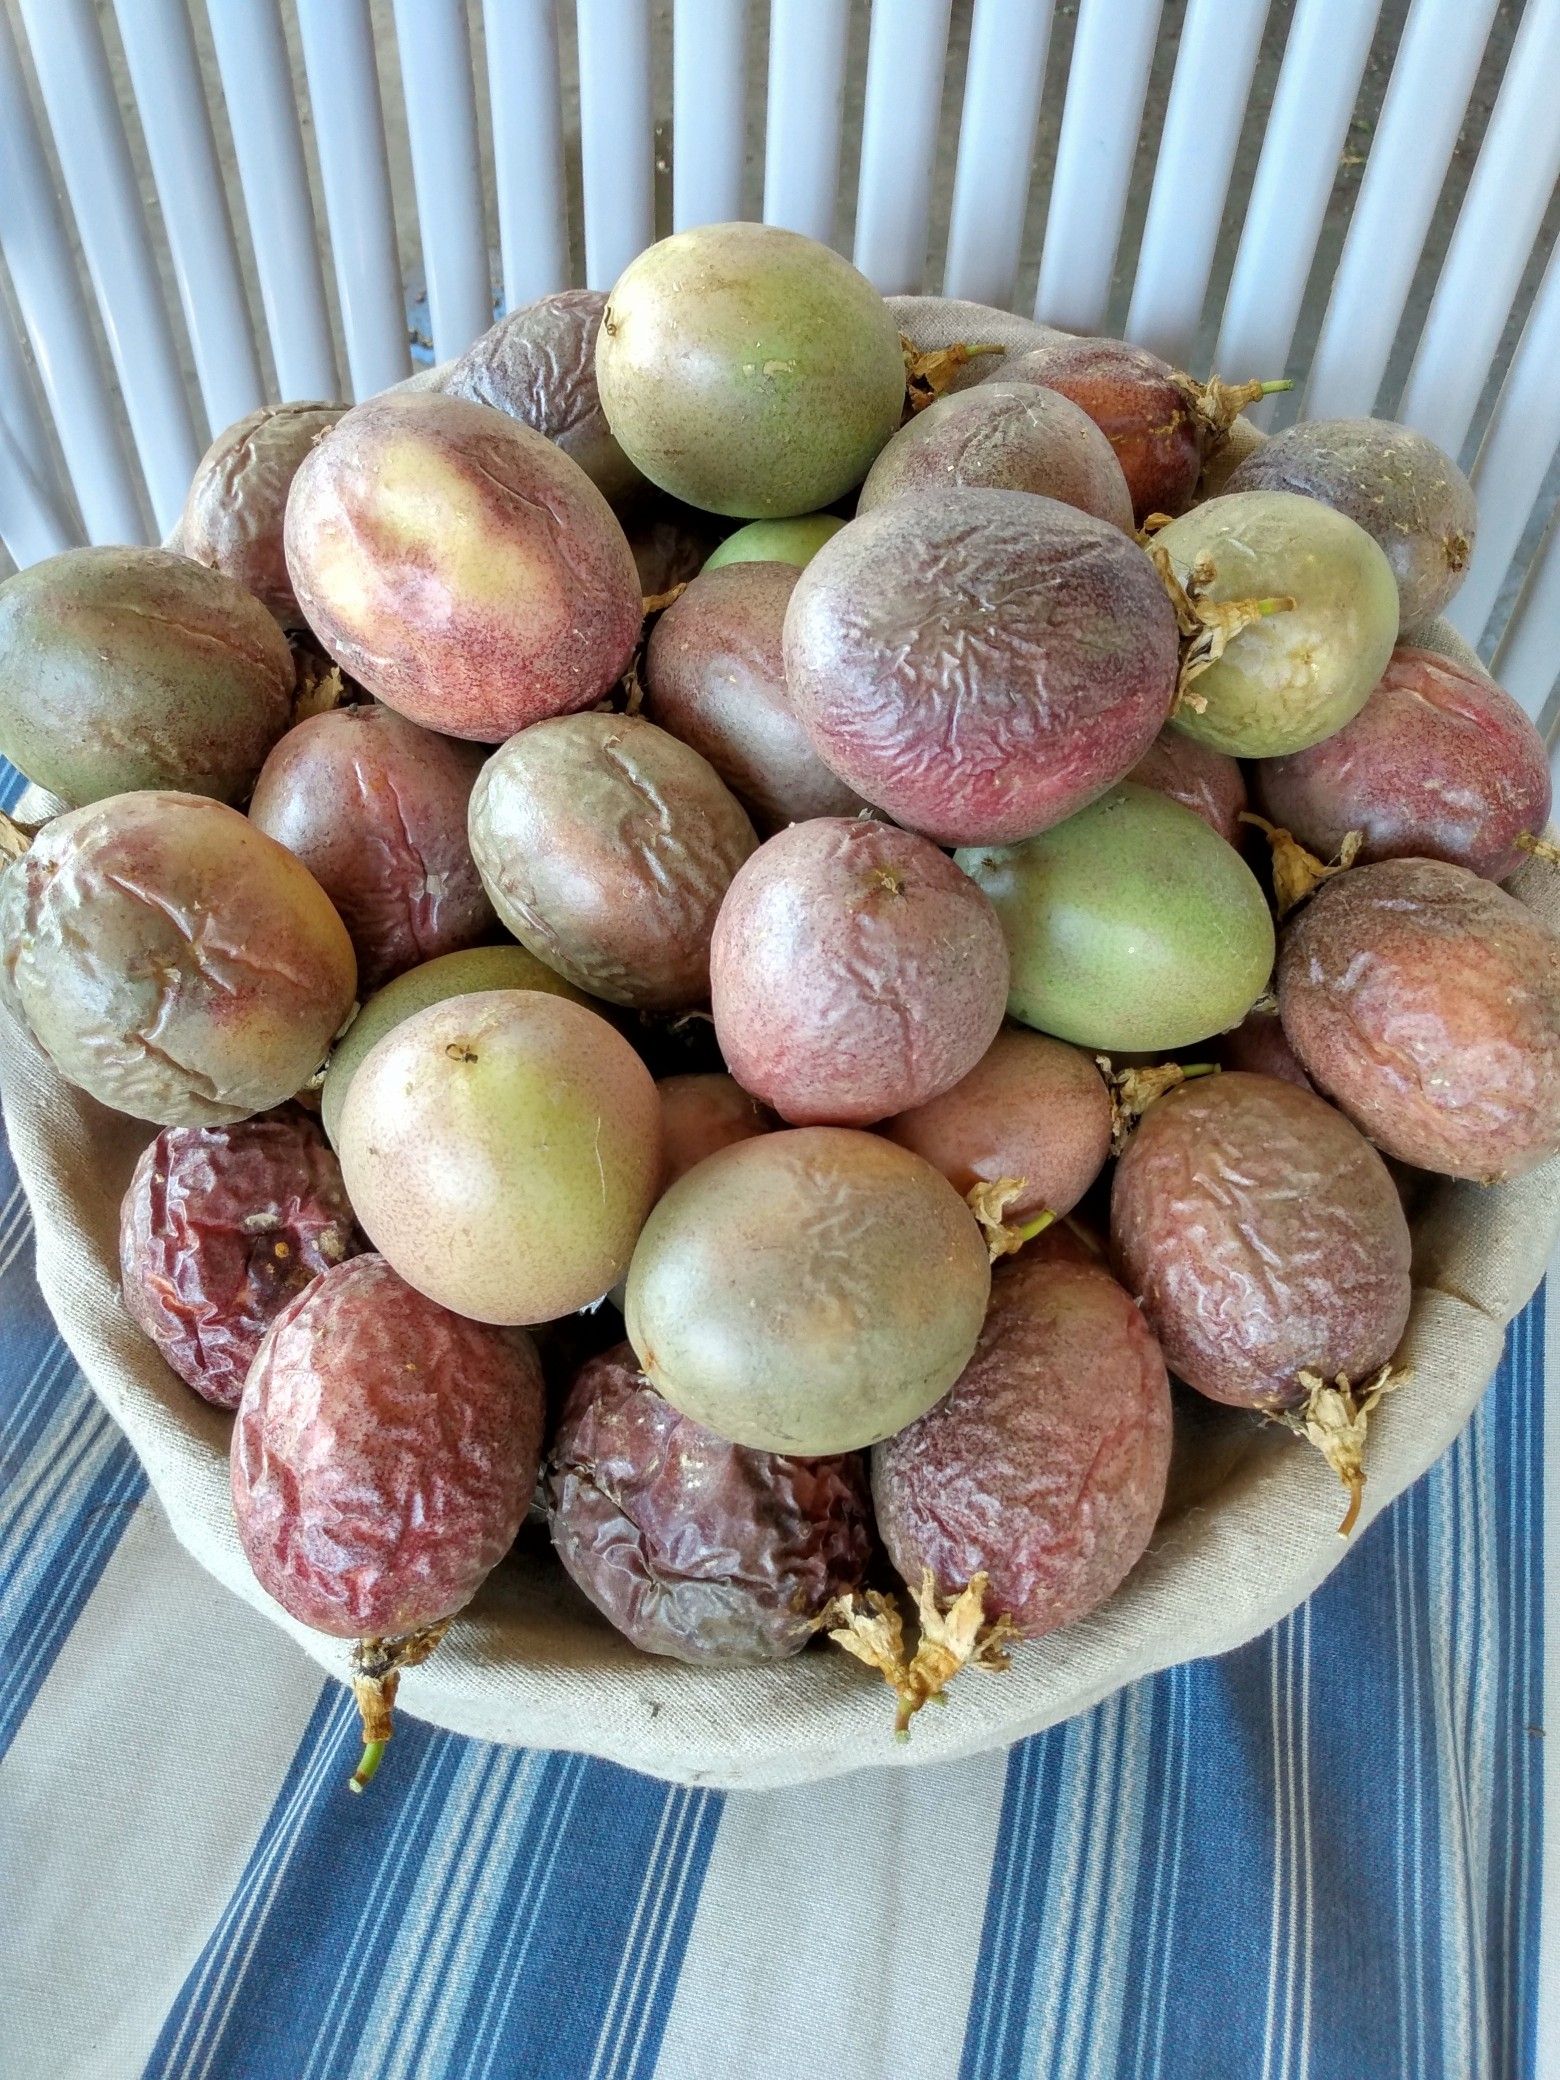 Passion fruits: $.50 for each fruit